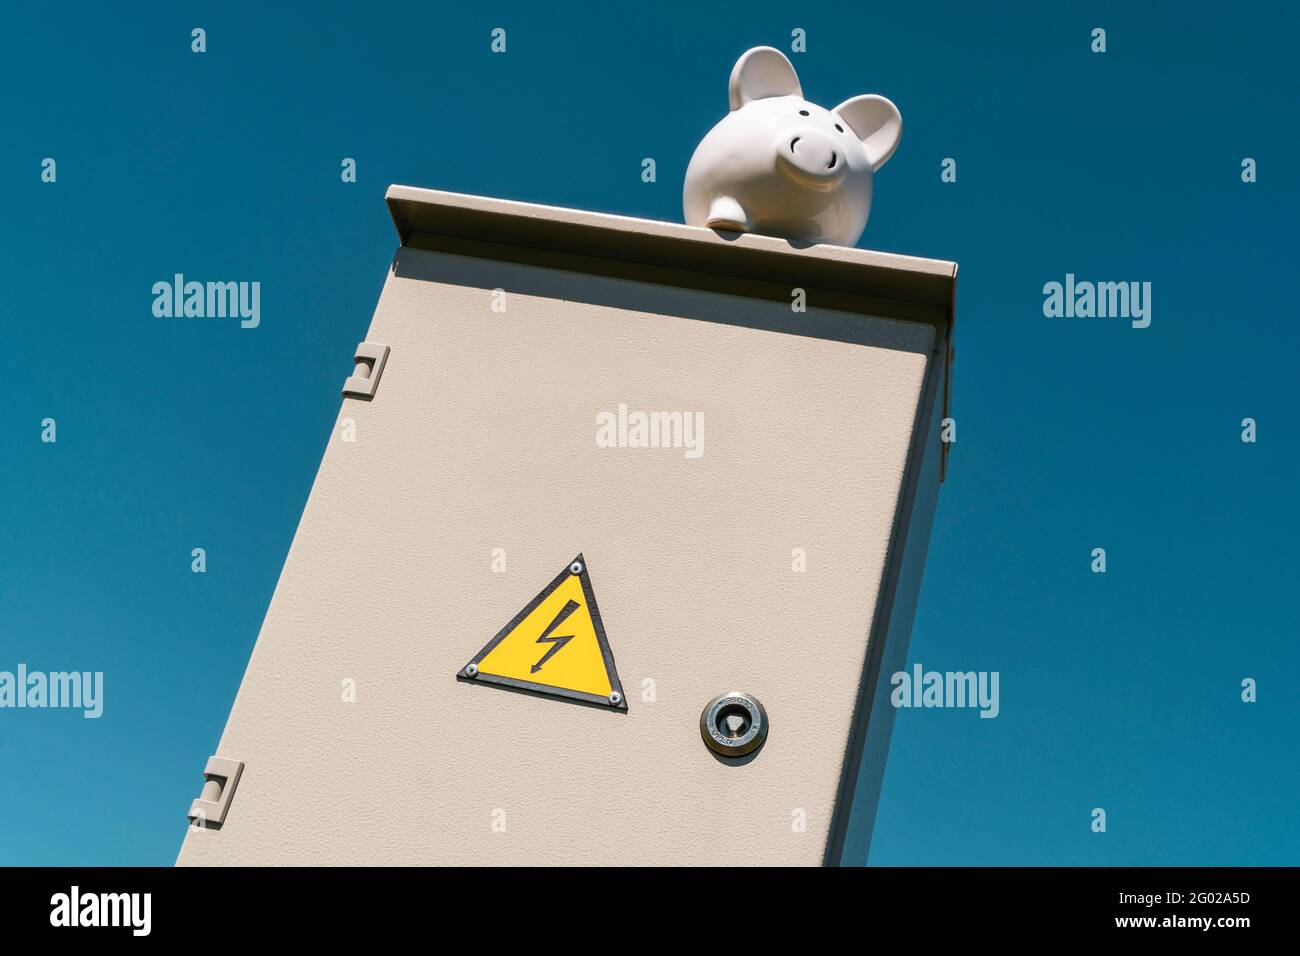 Piggy bank on the top of outdoor electric cabinet.Symbolic depiction of energy savings at home, utility bills, smart energy consumption. Stock Photo